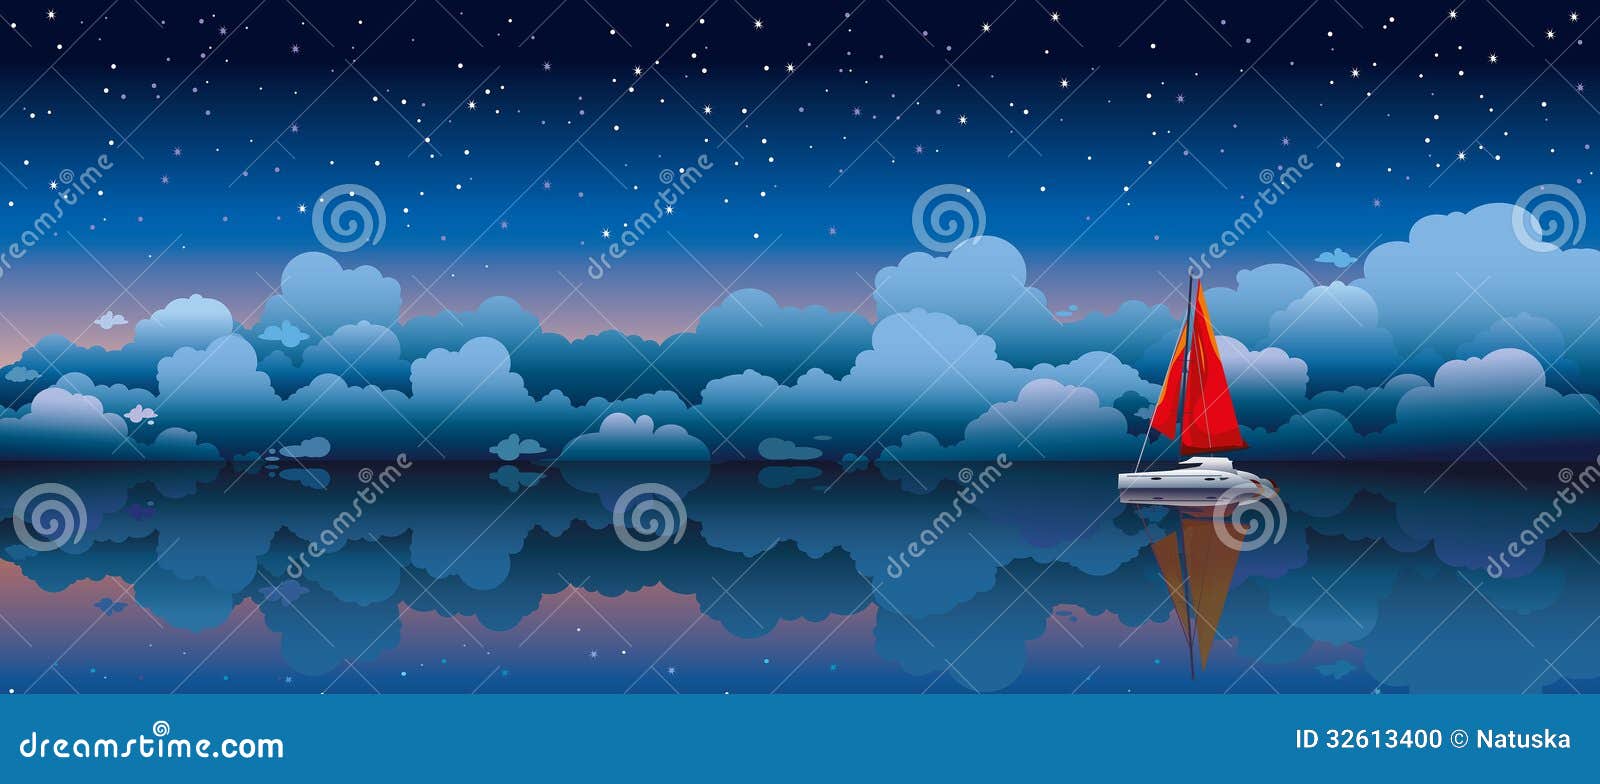 Sailing Boat In A Sea And Night Sky Stock Photo - Image: 32613400